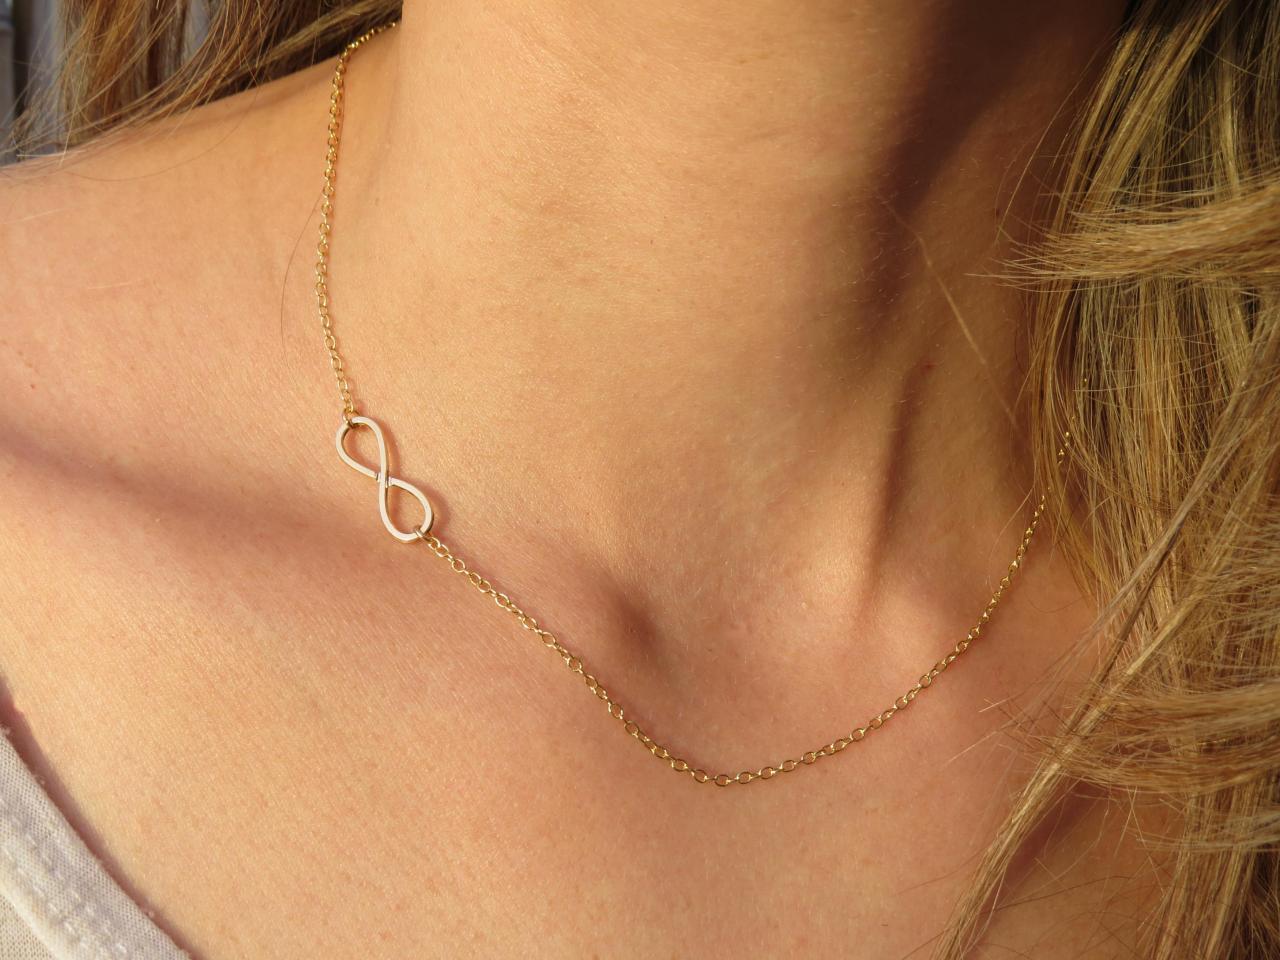 Gold Infinity Necklace - Tiny Infinity Necklace, Bridesmaids Gift